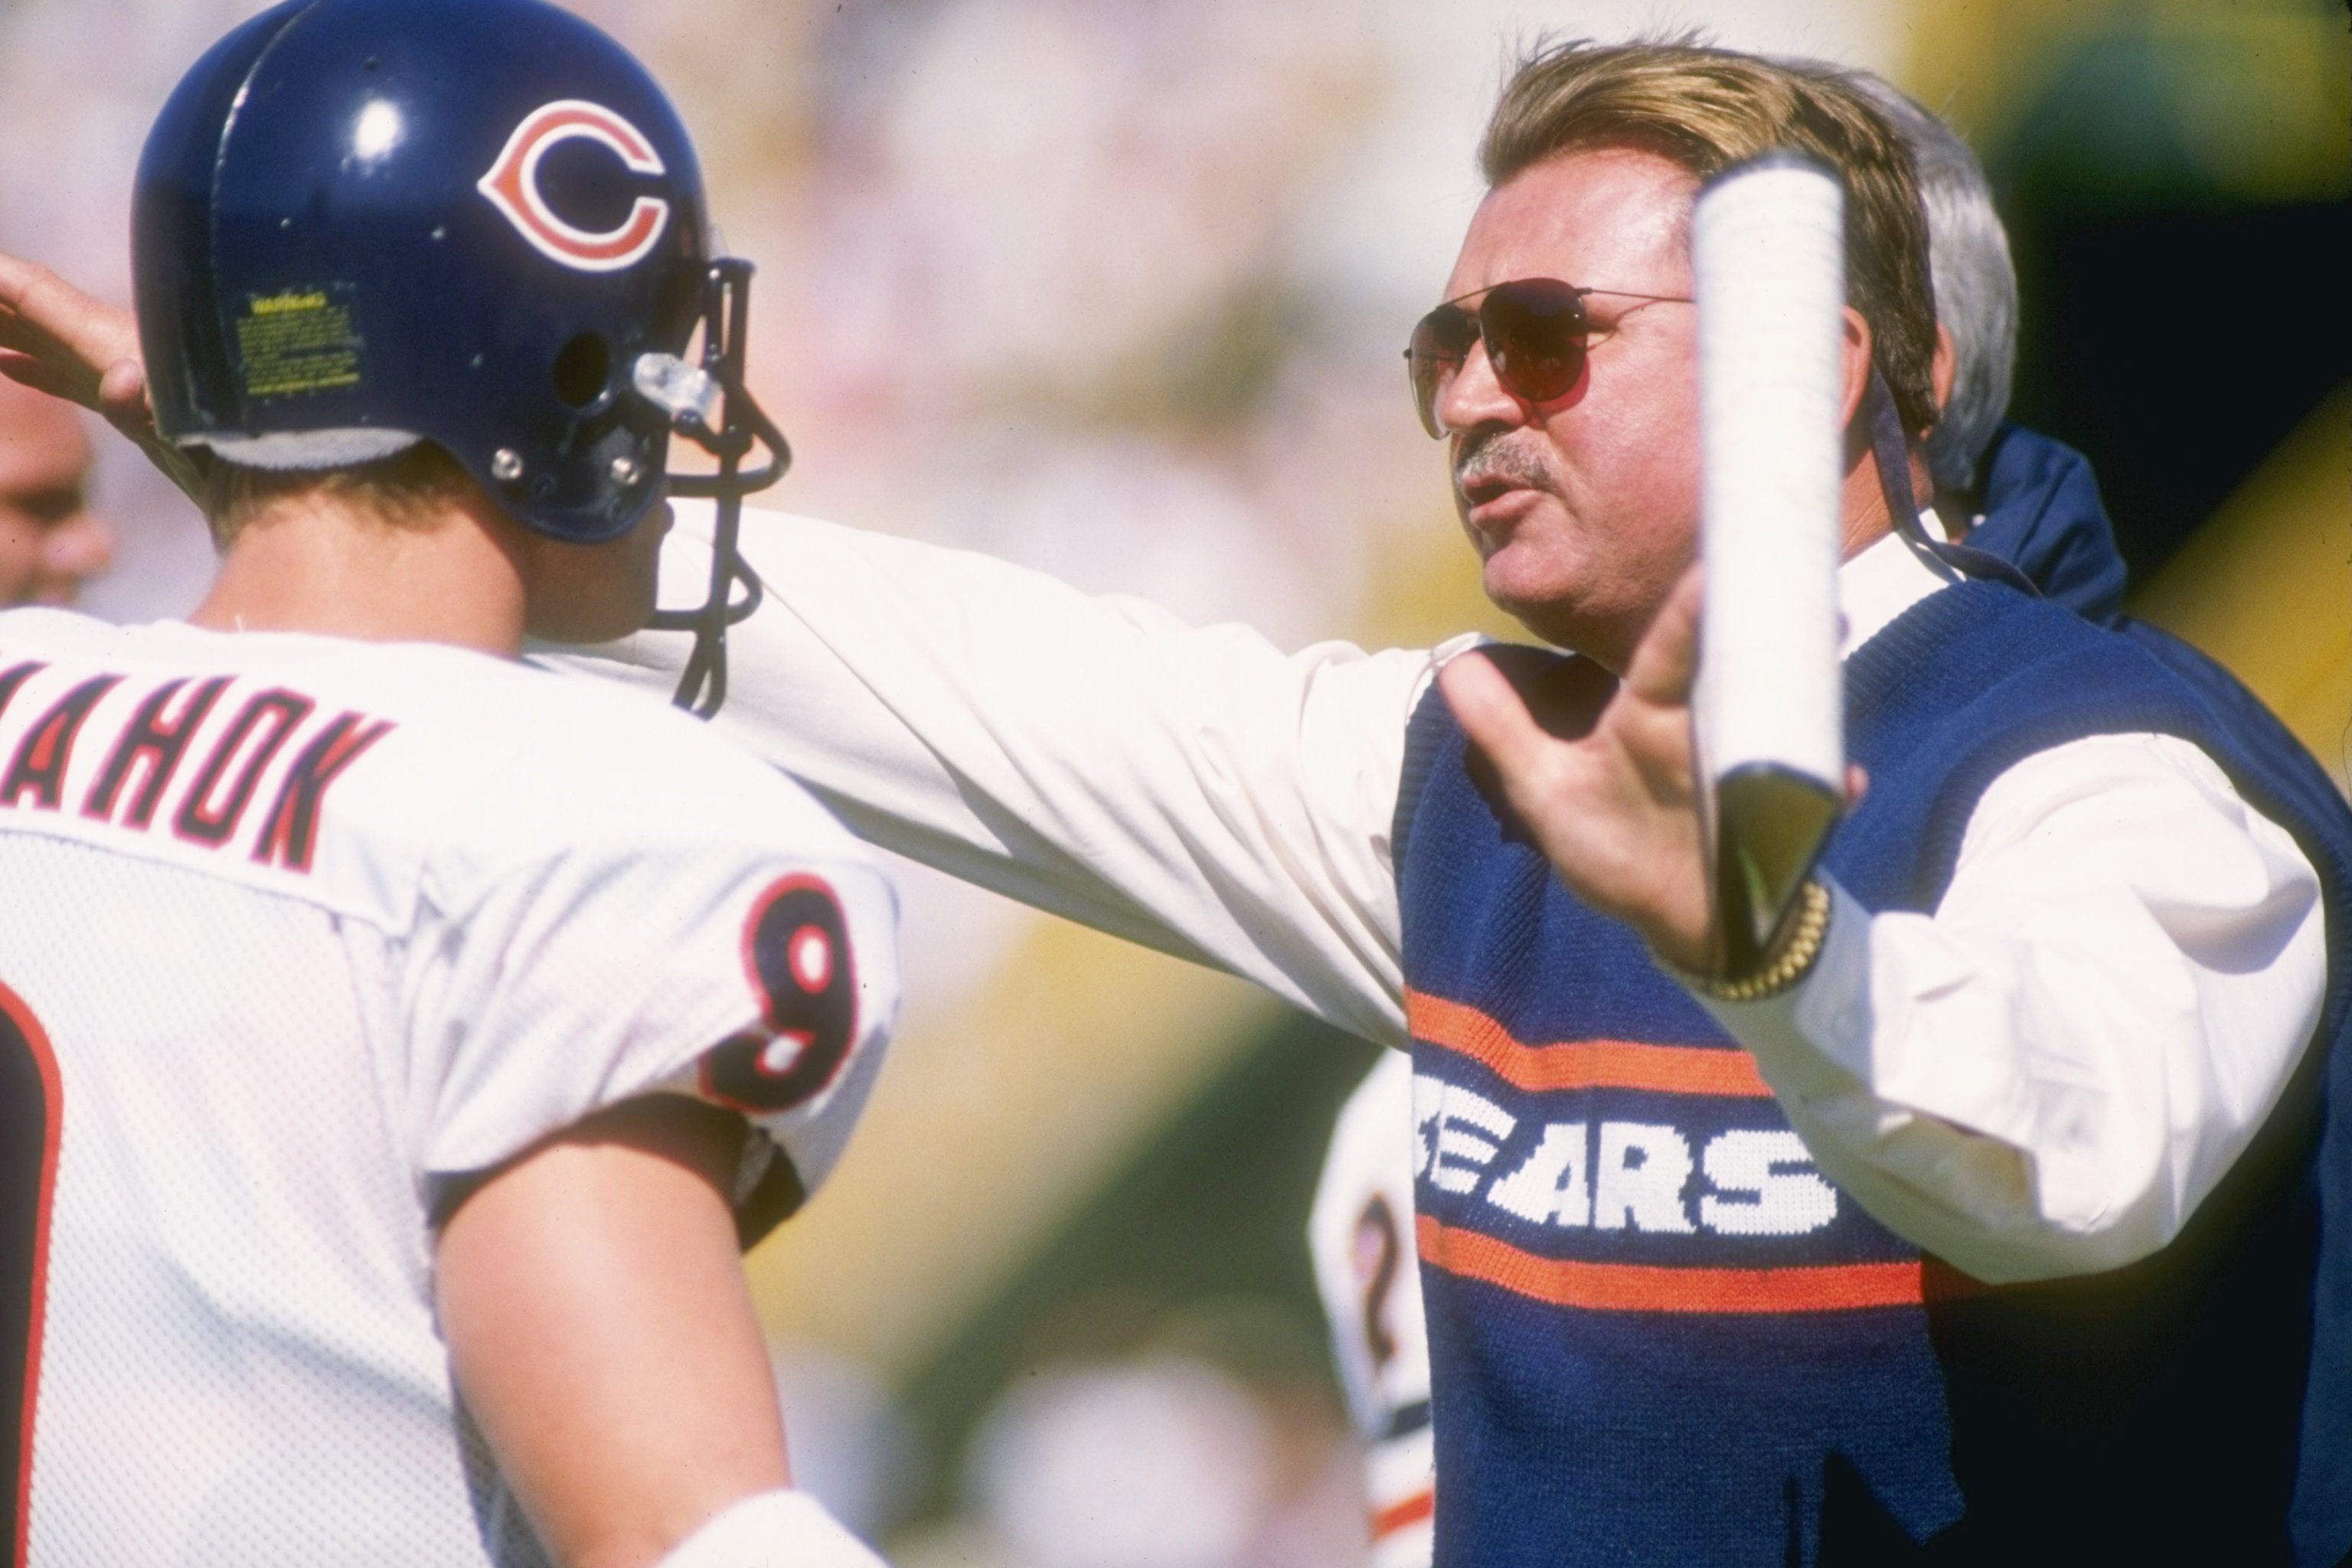 Mike Ditka's Super Bowl sweater is up for auction - Chicago Sun-Times